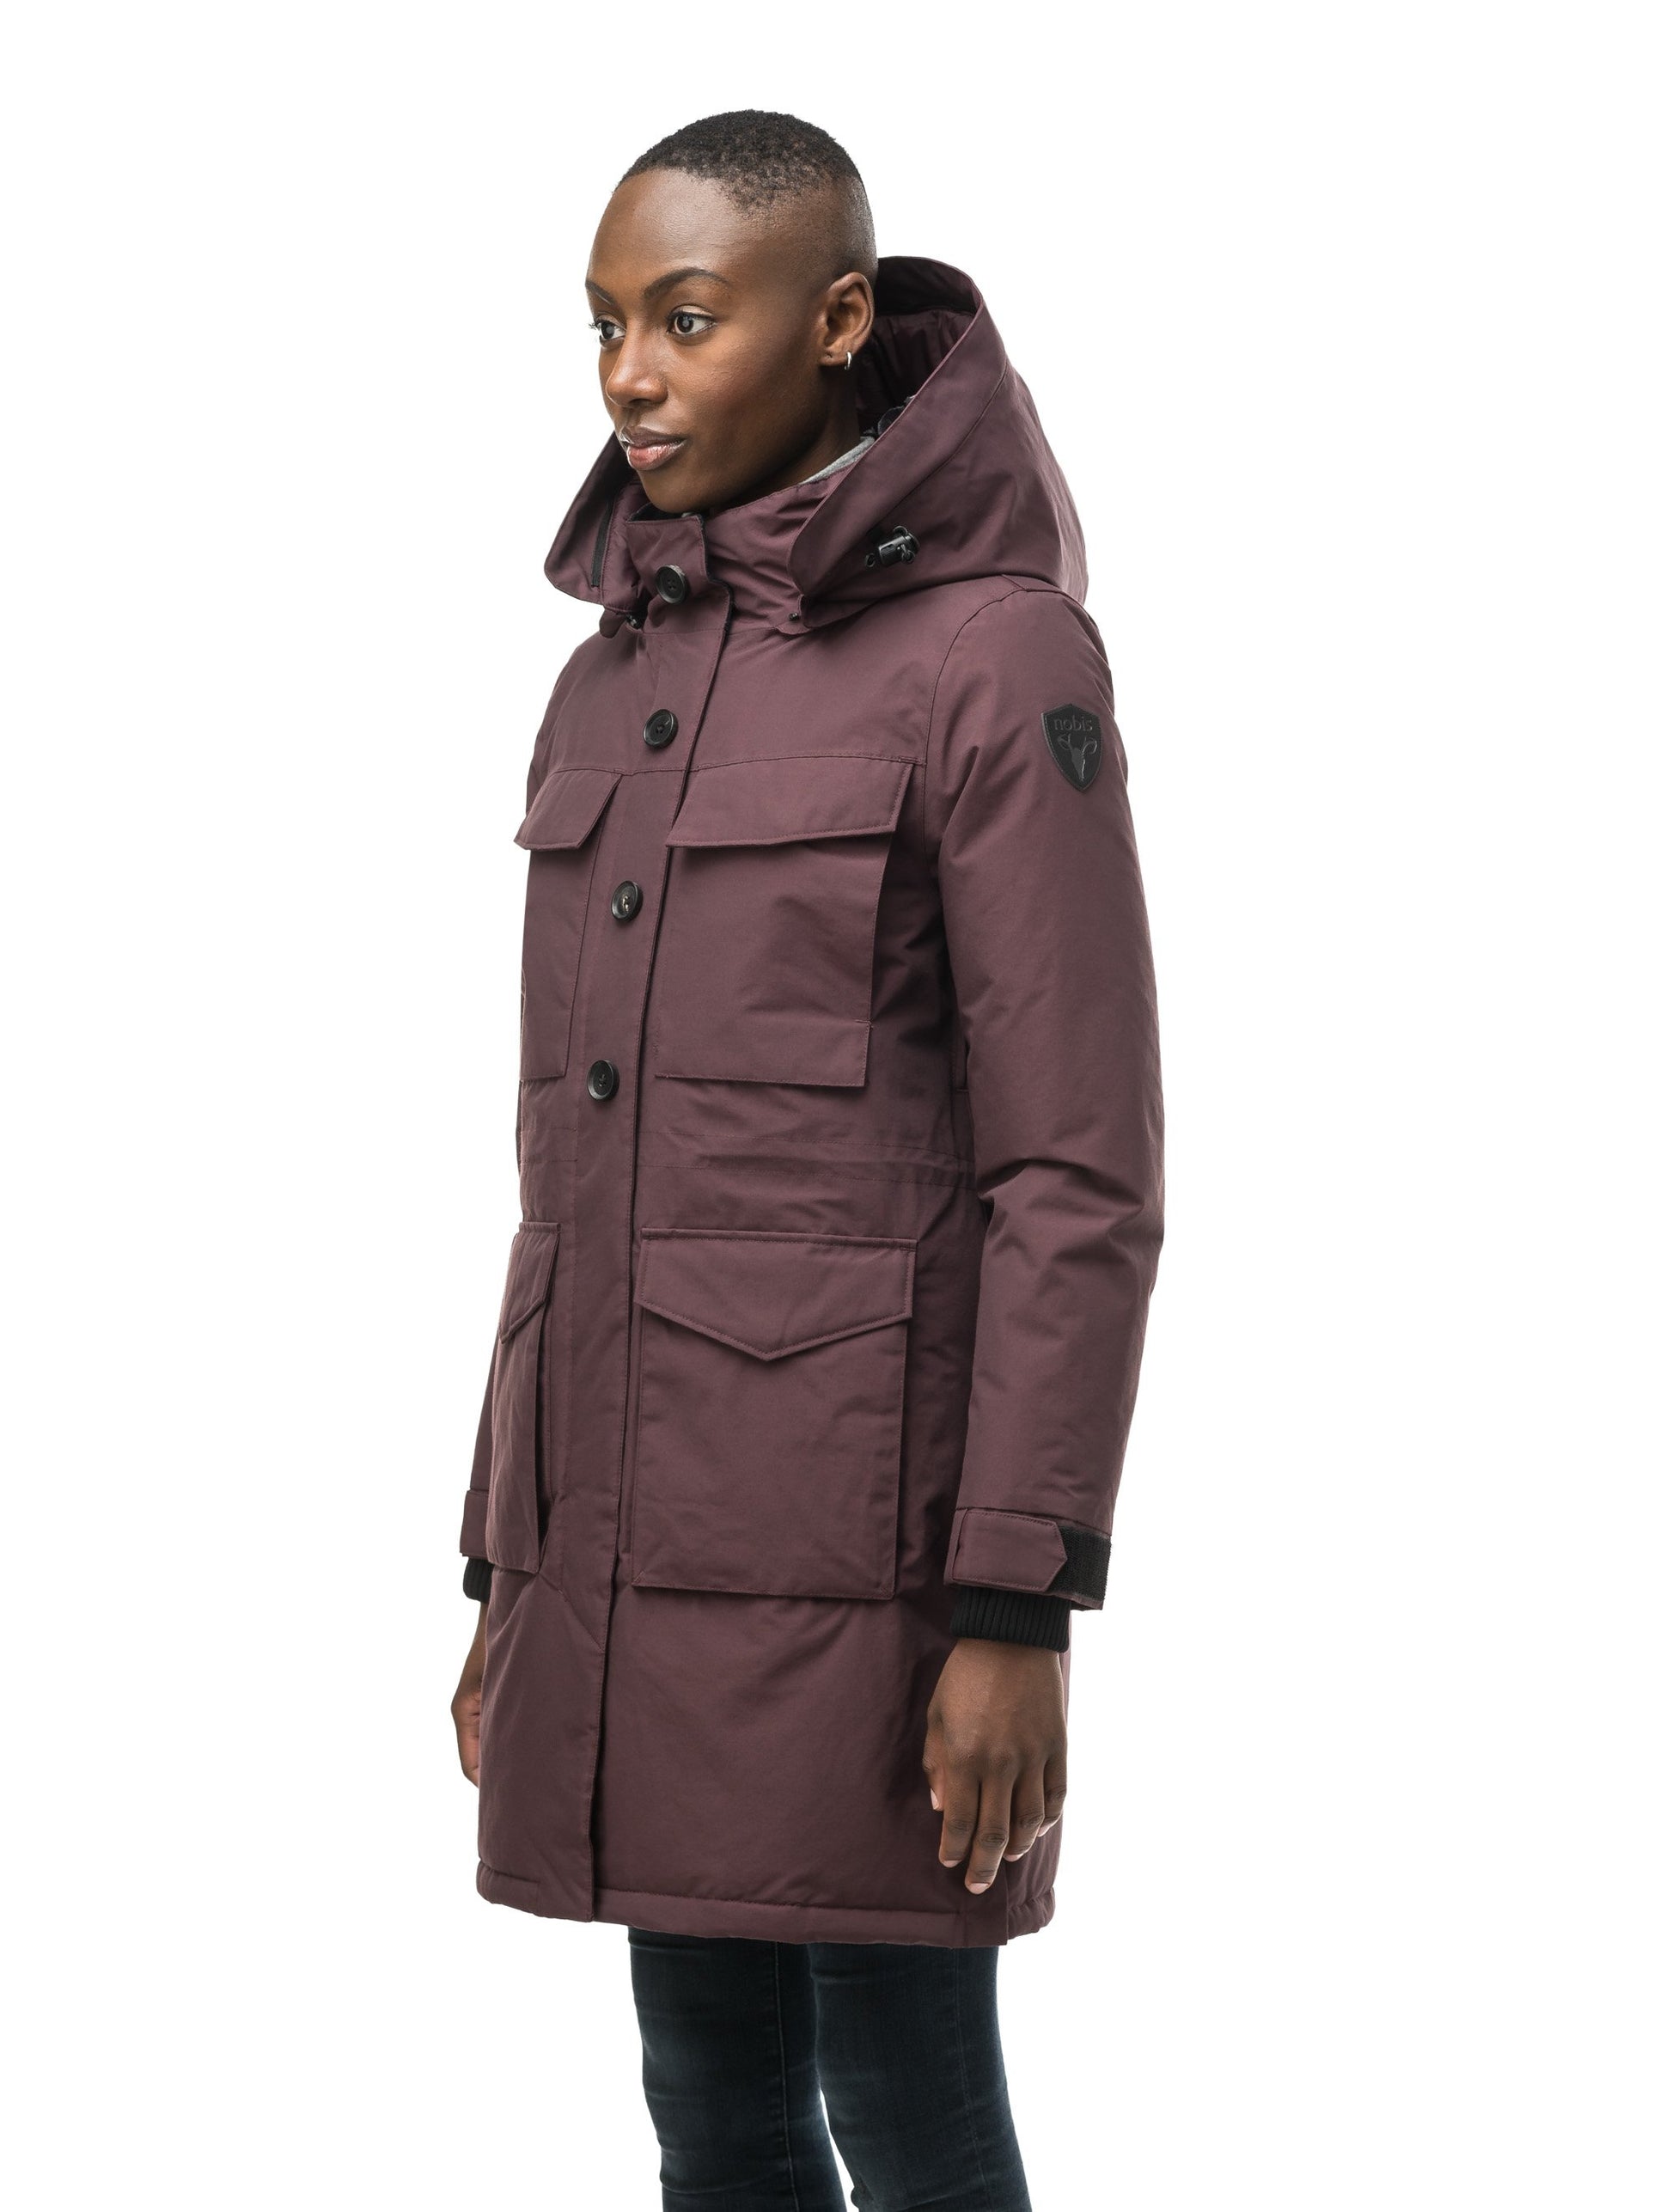 Women's knee length down filled parka with two chest patch pockets and two waist patch pockets in Burgundy